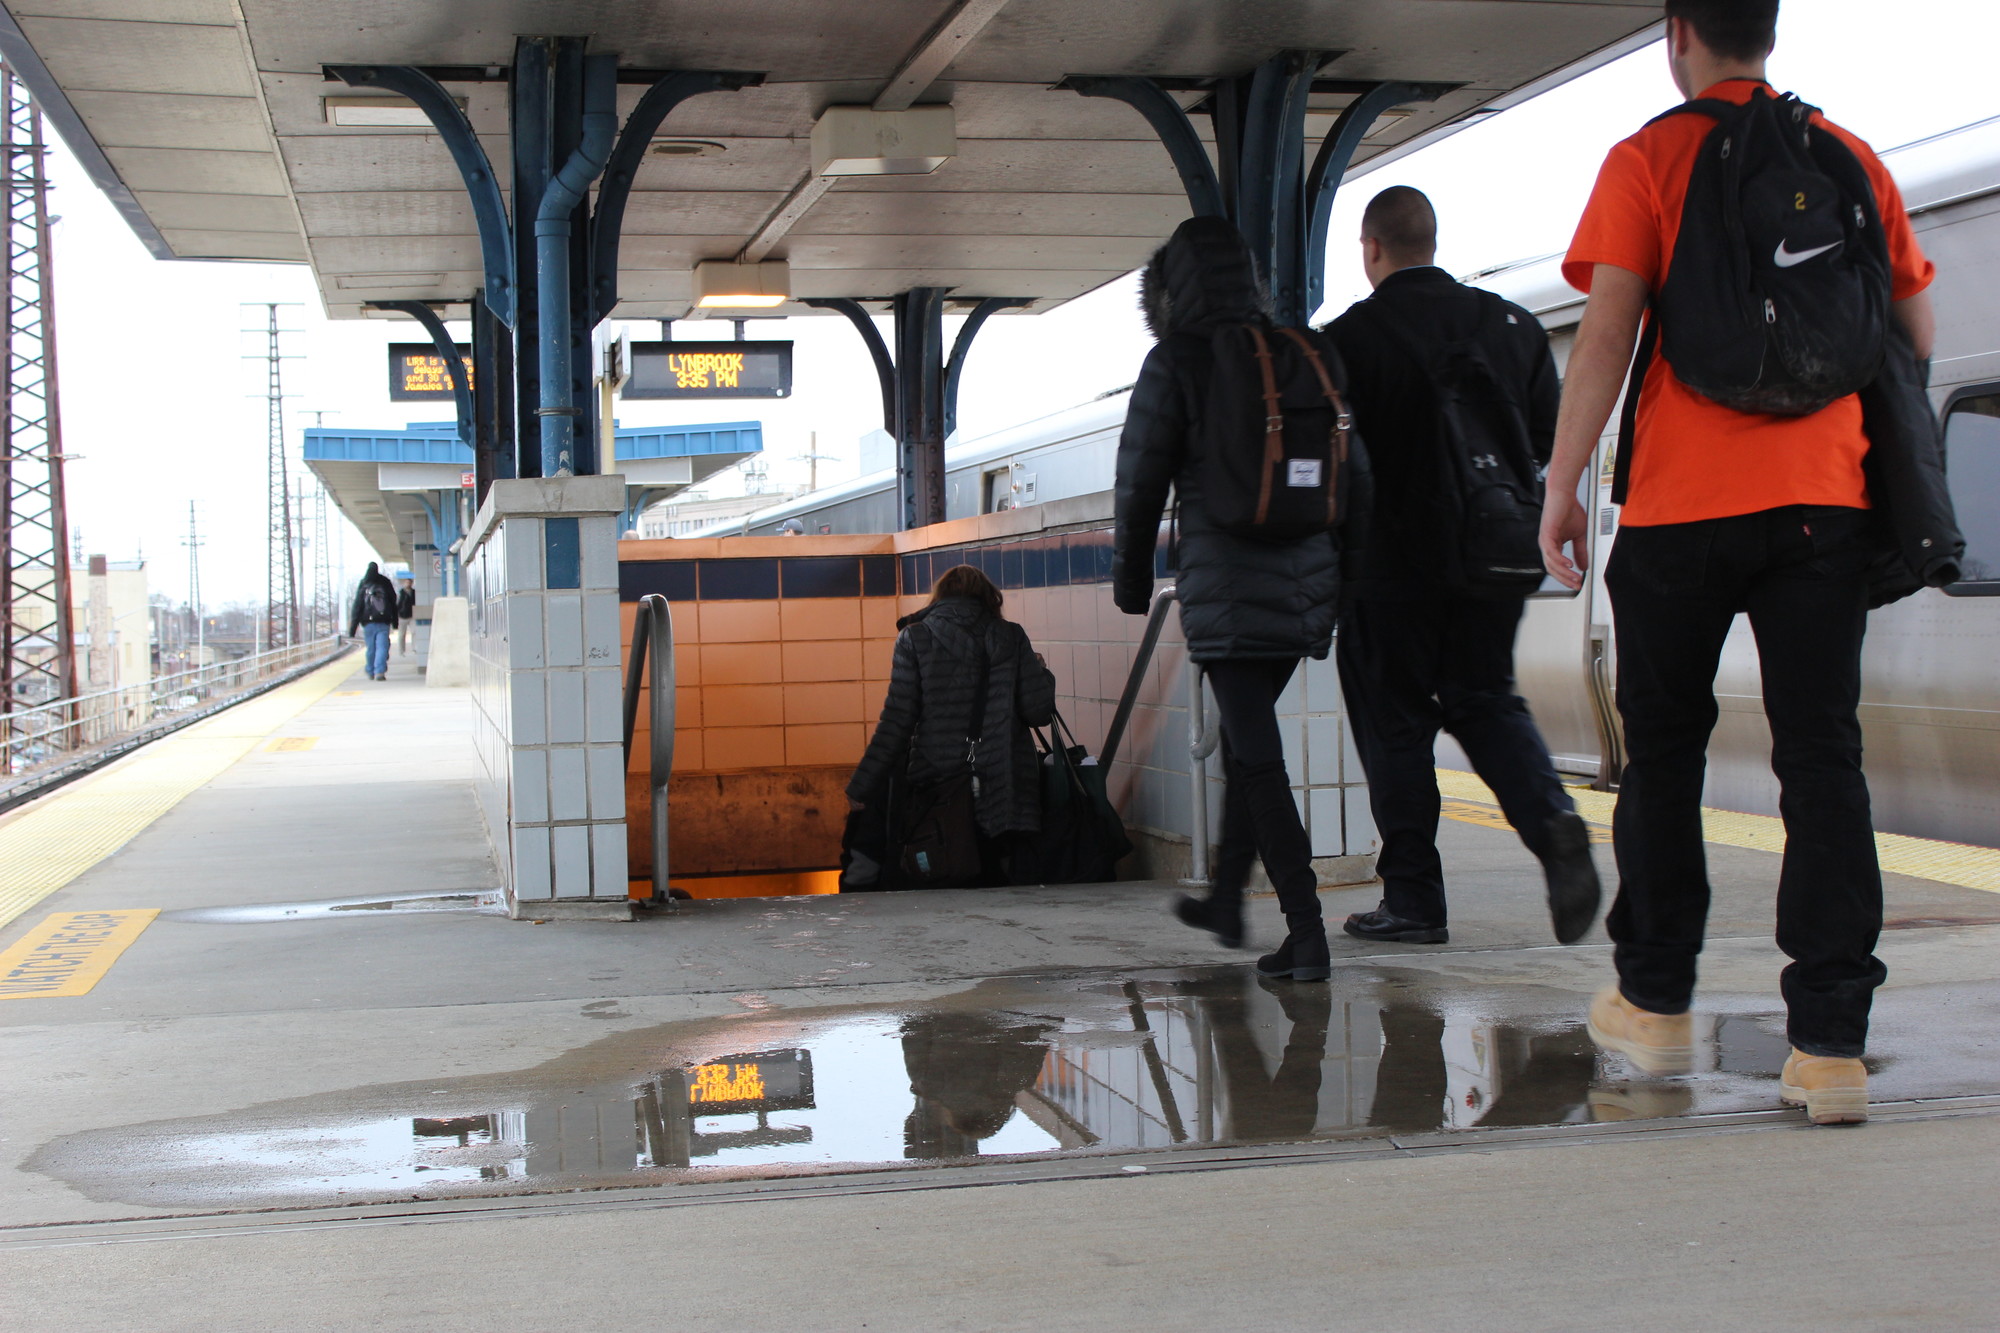 Pools of rainwater collected underneath a leaky roof canopy at the Lynbrook train station after a heavy rainstorm.